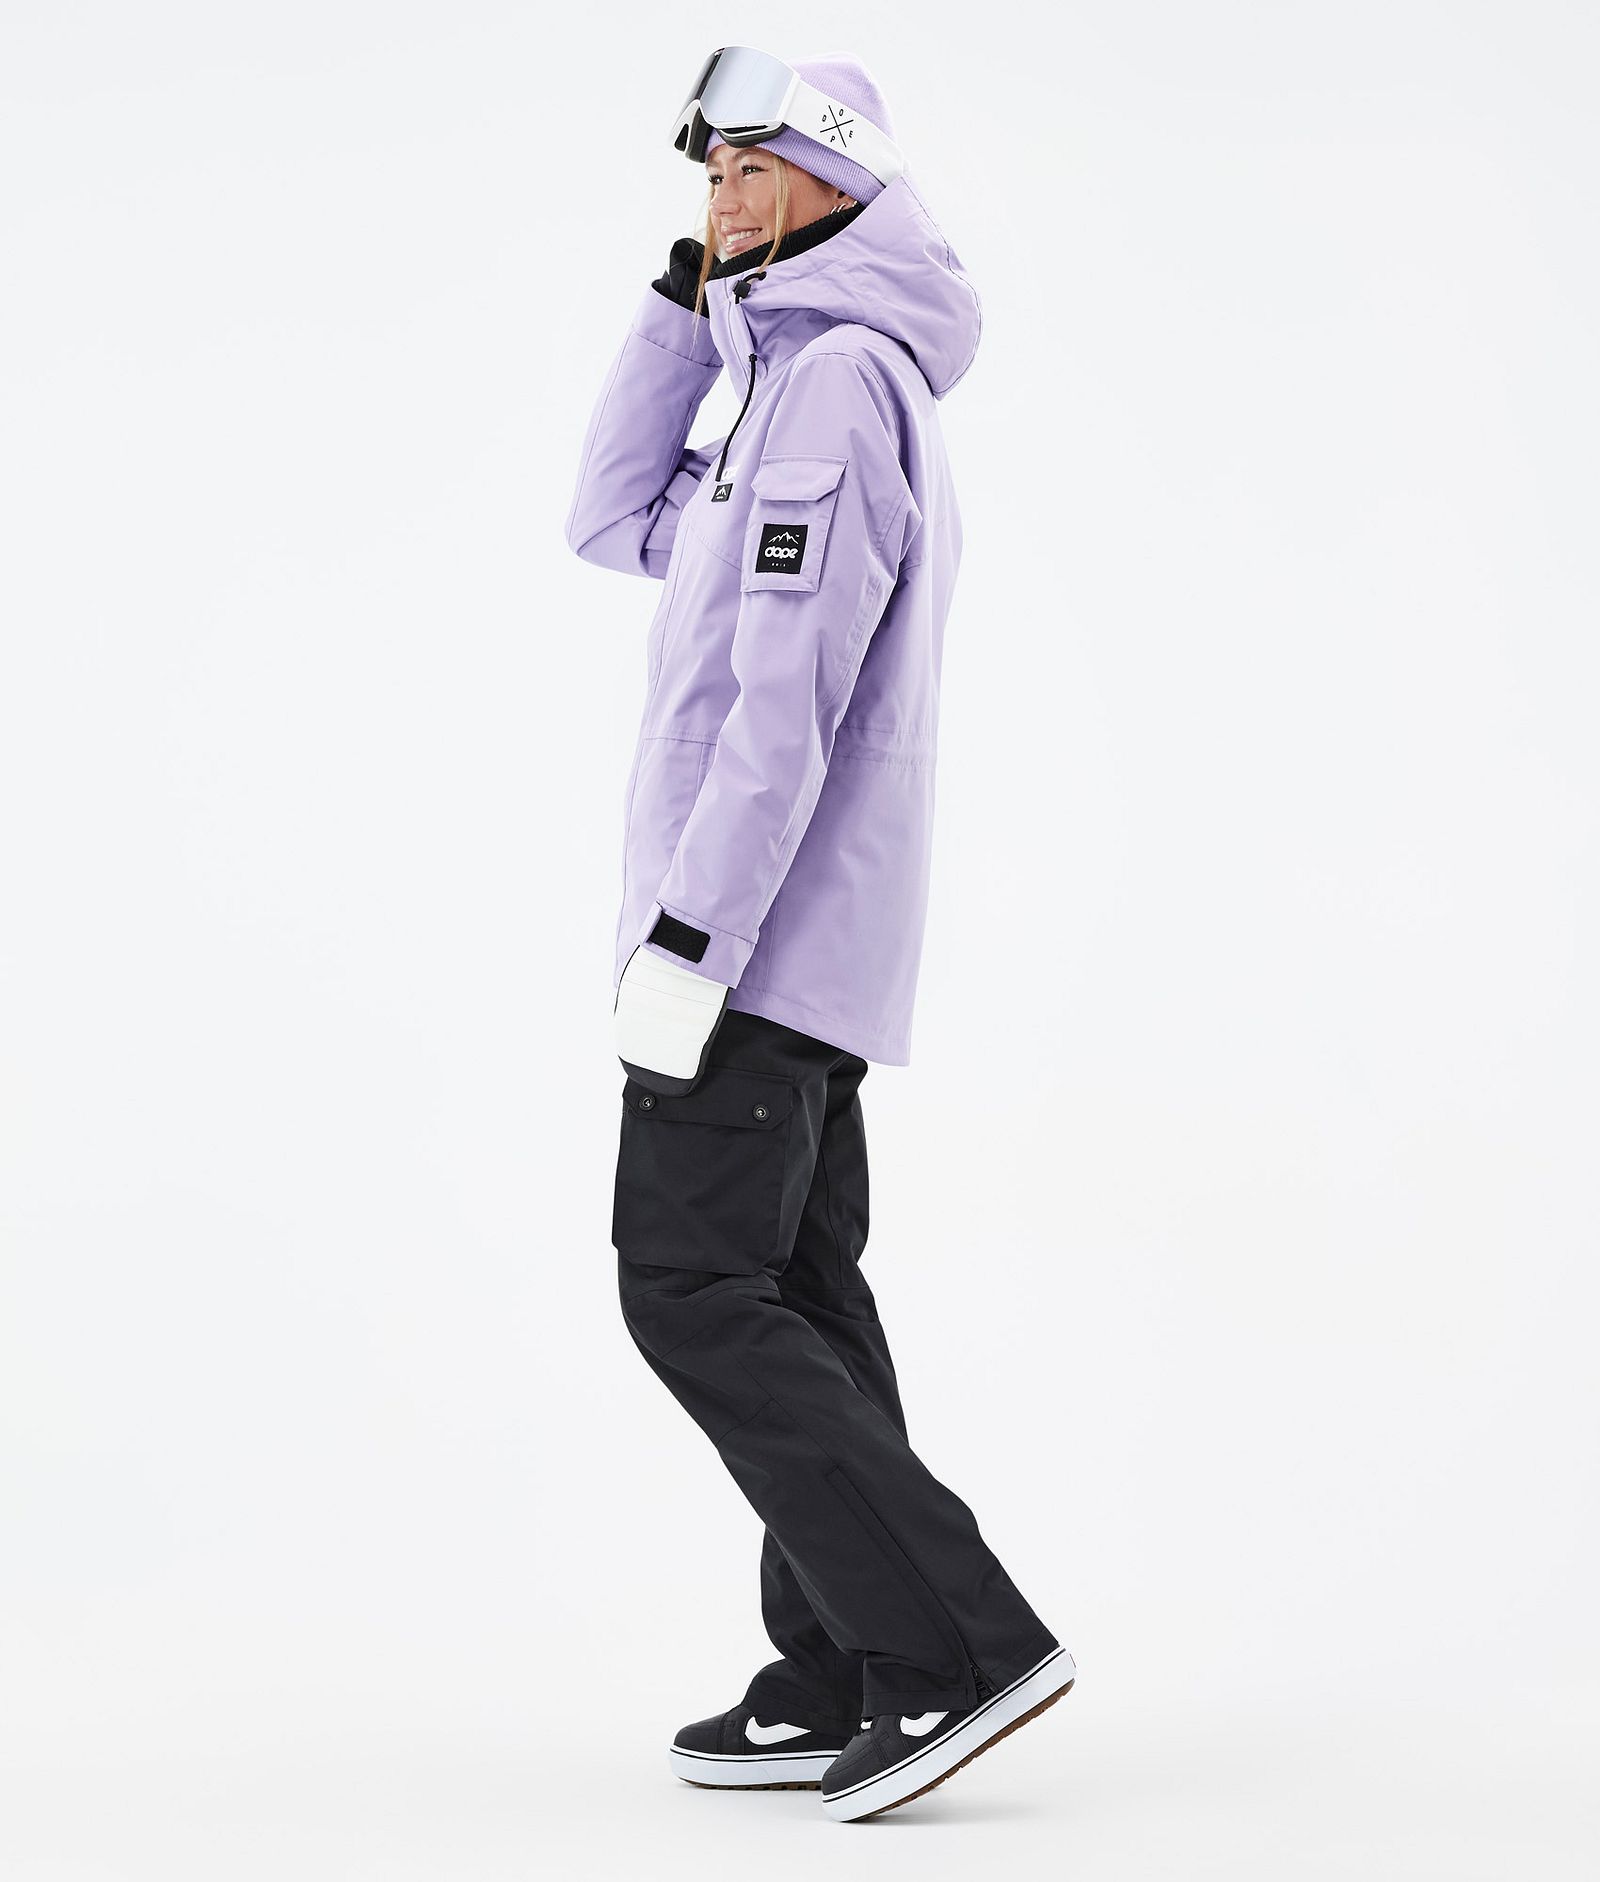 Adept W Giacca Snowboard Donna Faded Violet